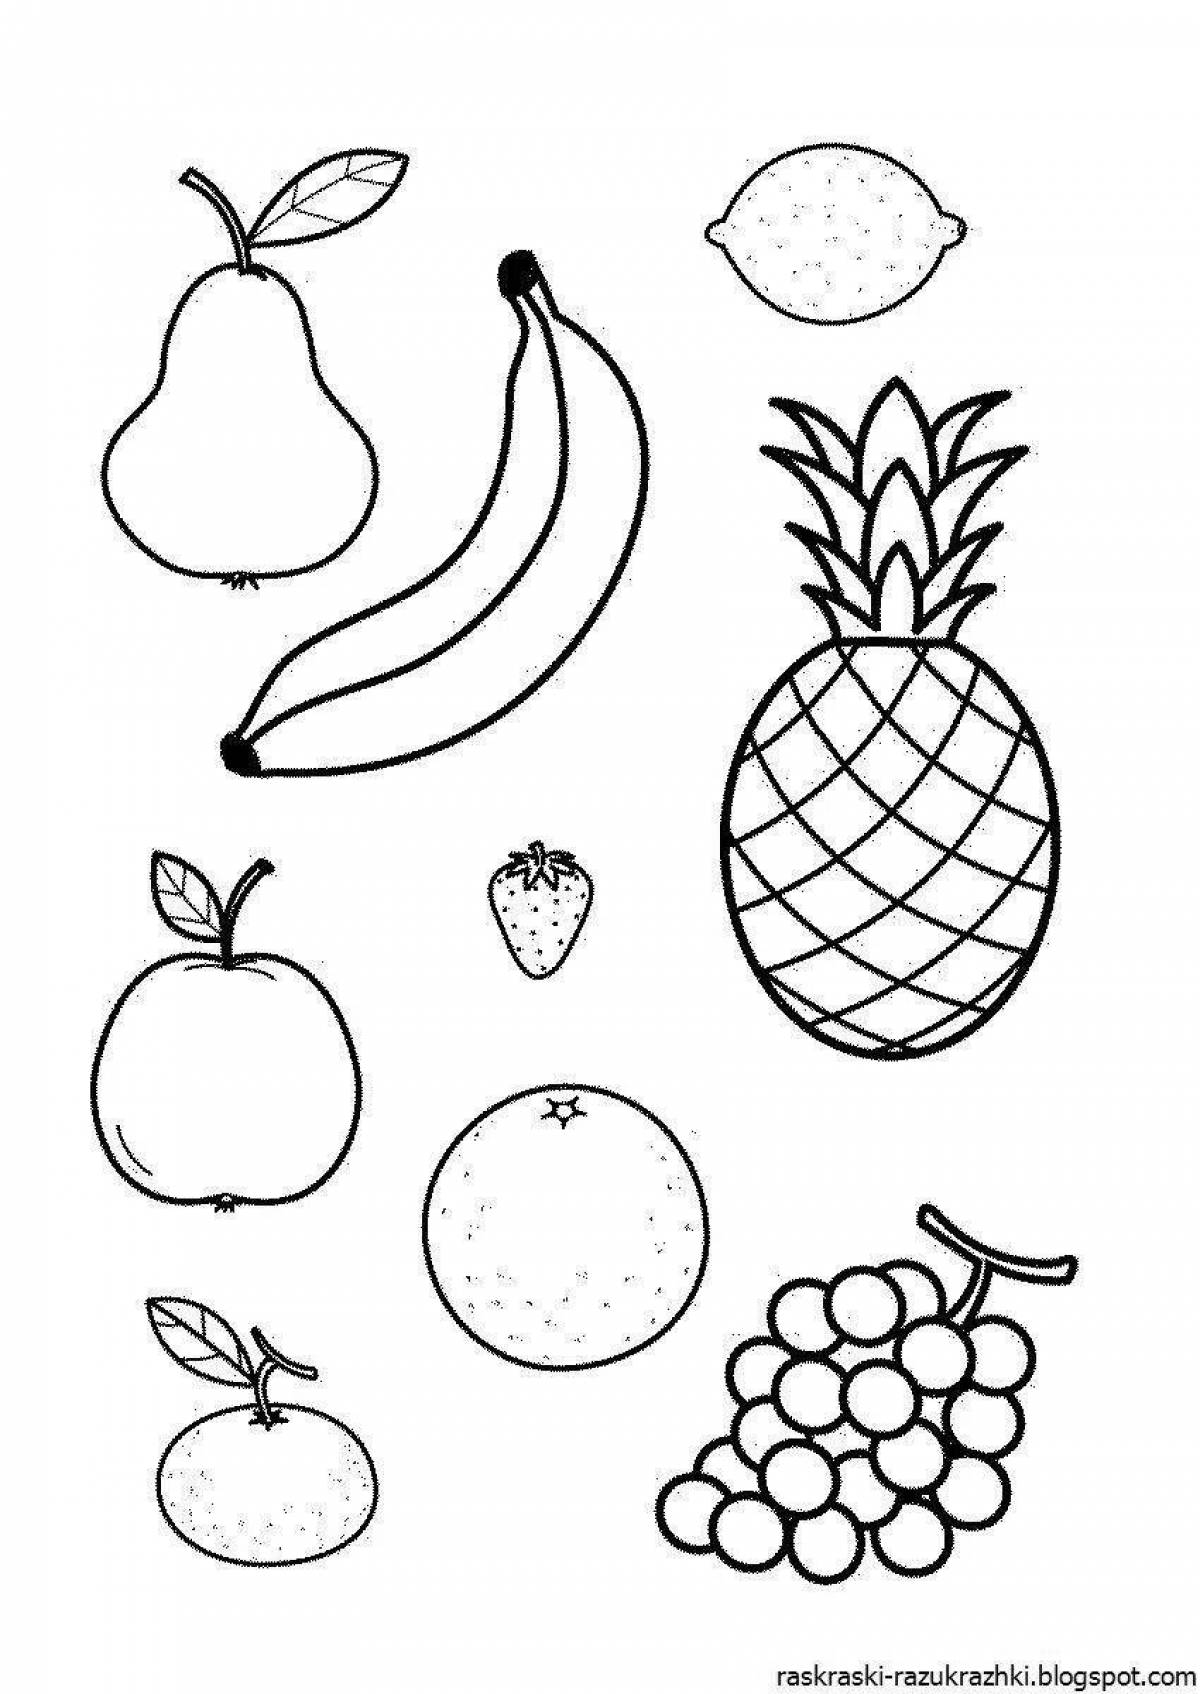 Creative fruit coloring book for 2-3 year olds